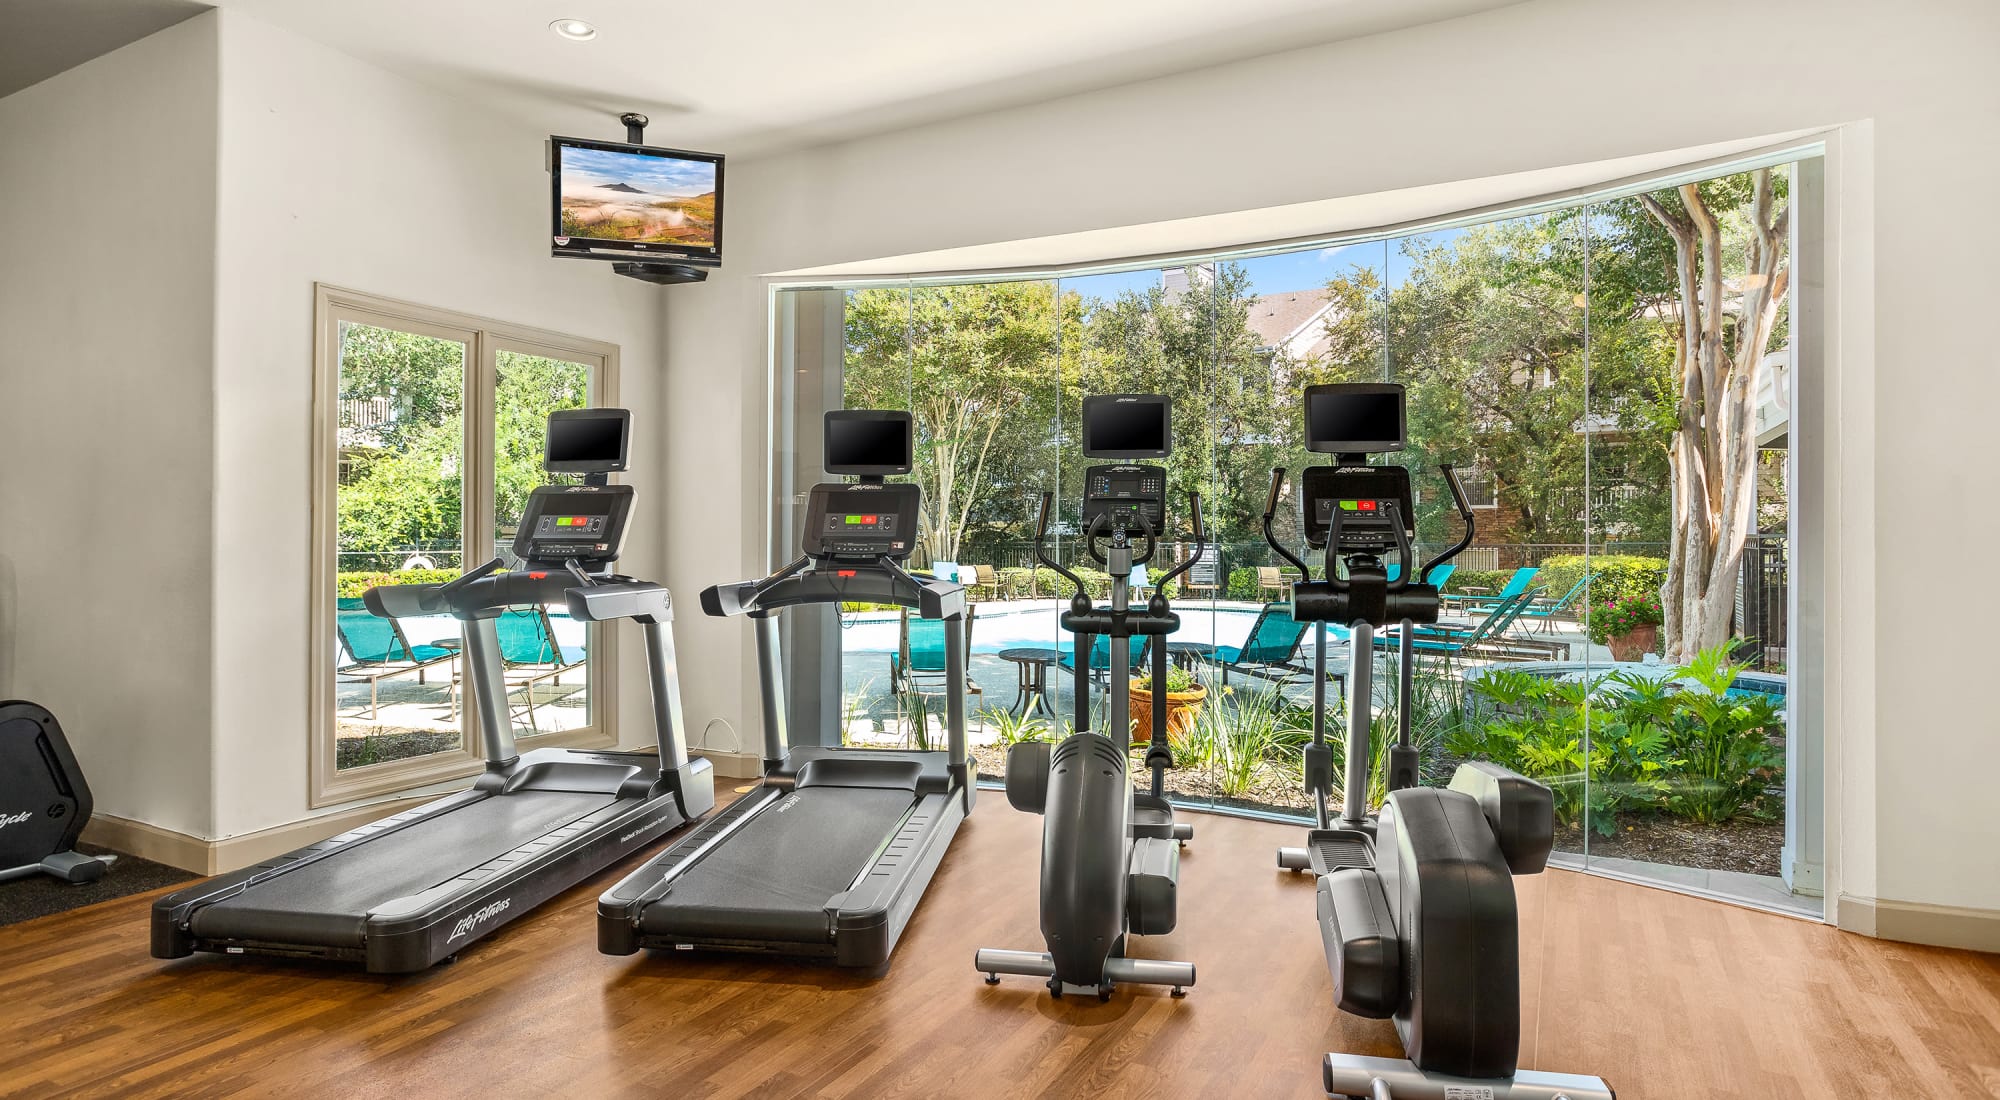 Fitness center at The Lodge at Westover Hills